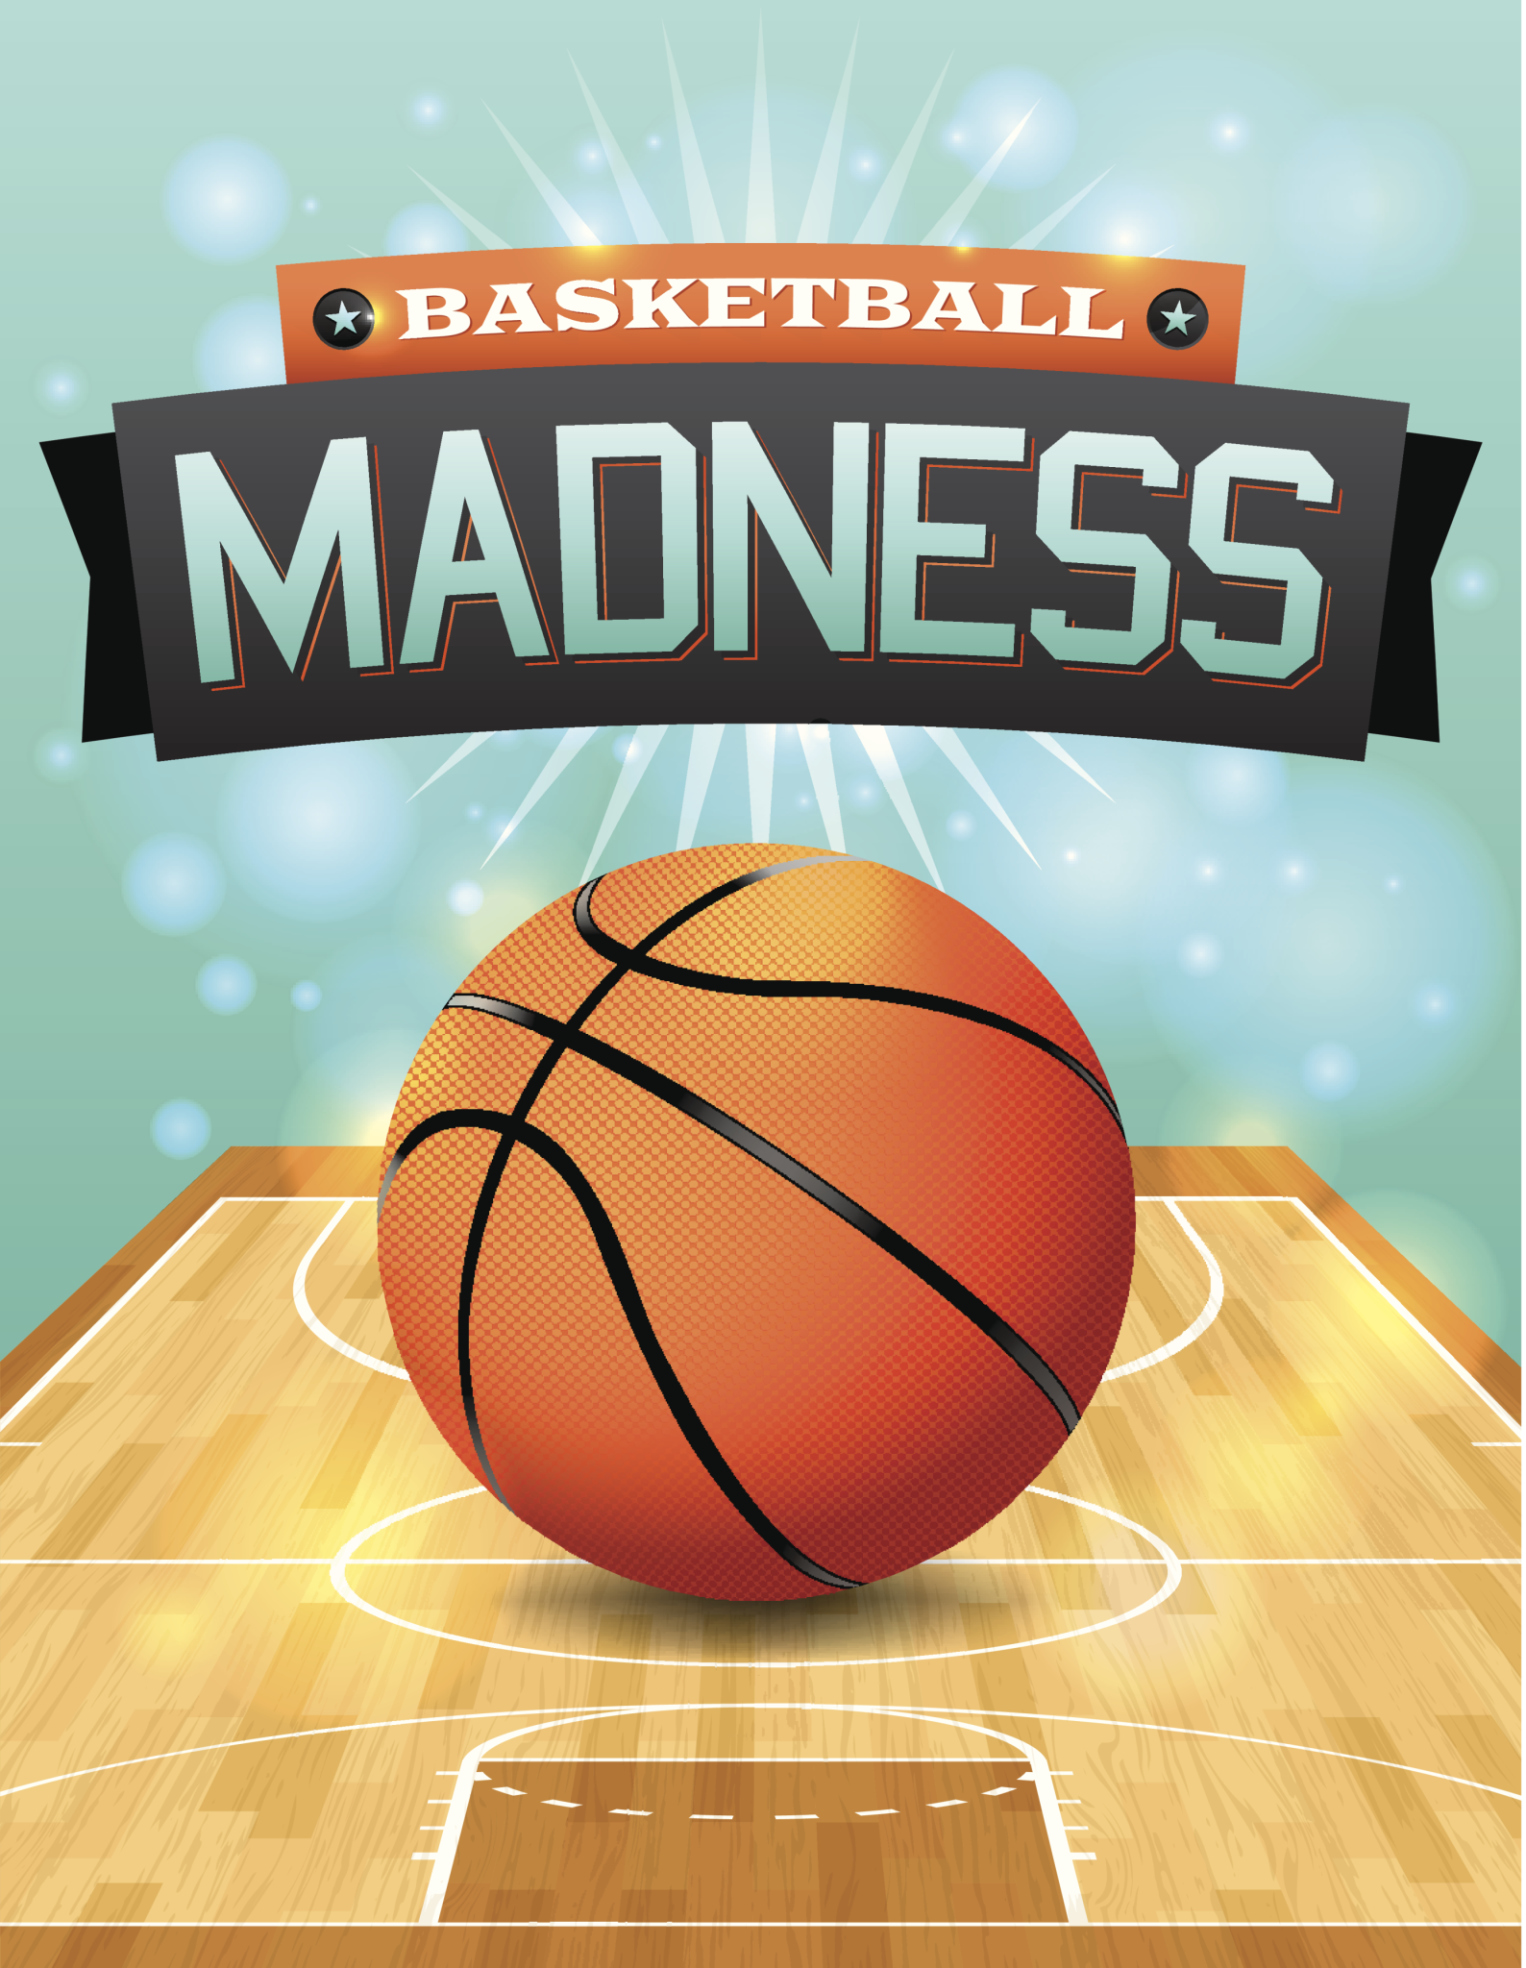 tournament bracket, 2016 bracket, basketball, bracket, championship, collaborate, fill out, forms, free, march madness, NCAA, printable, send, Share, sports